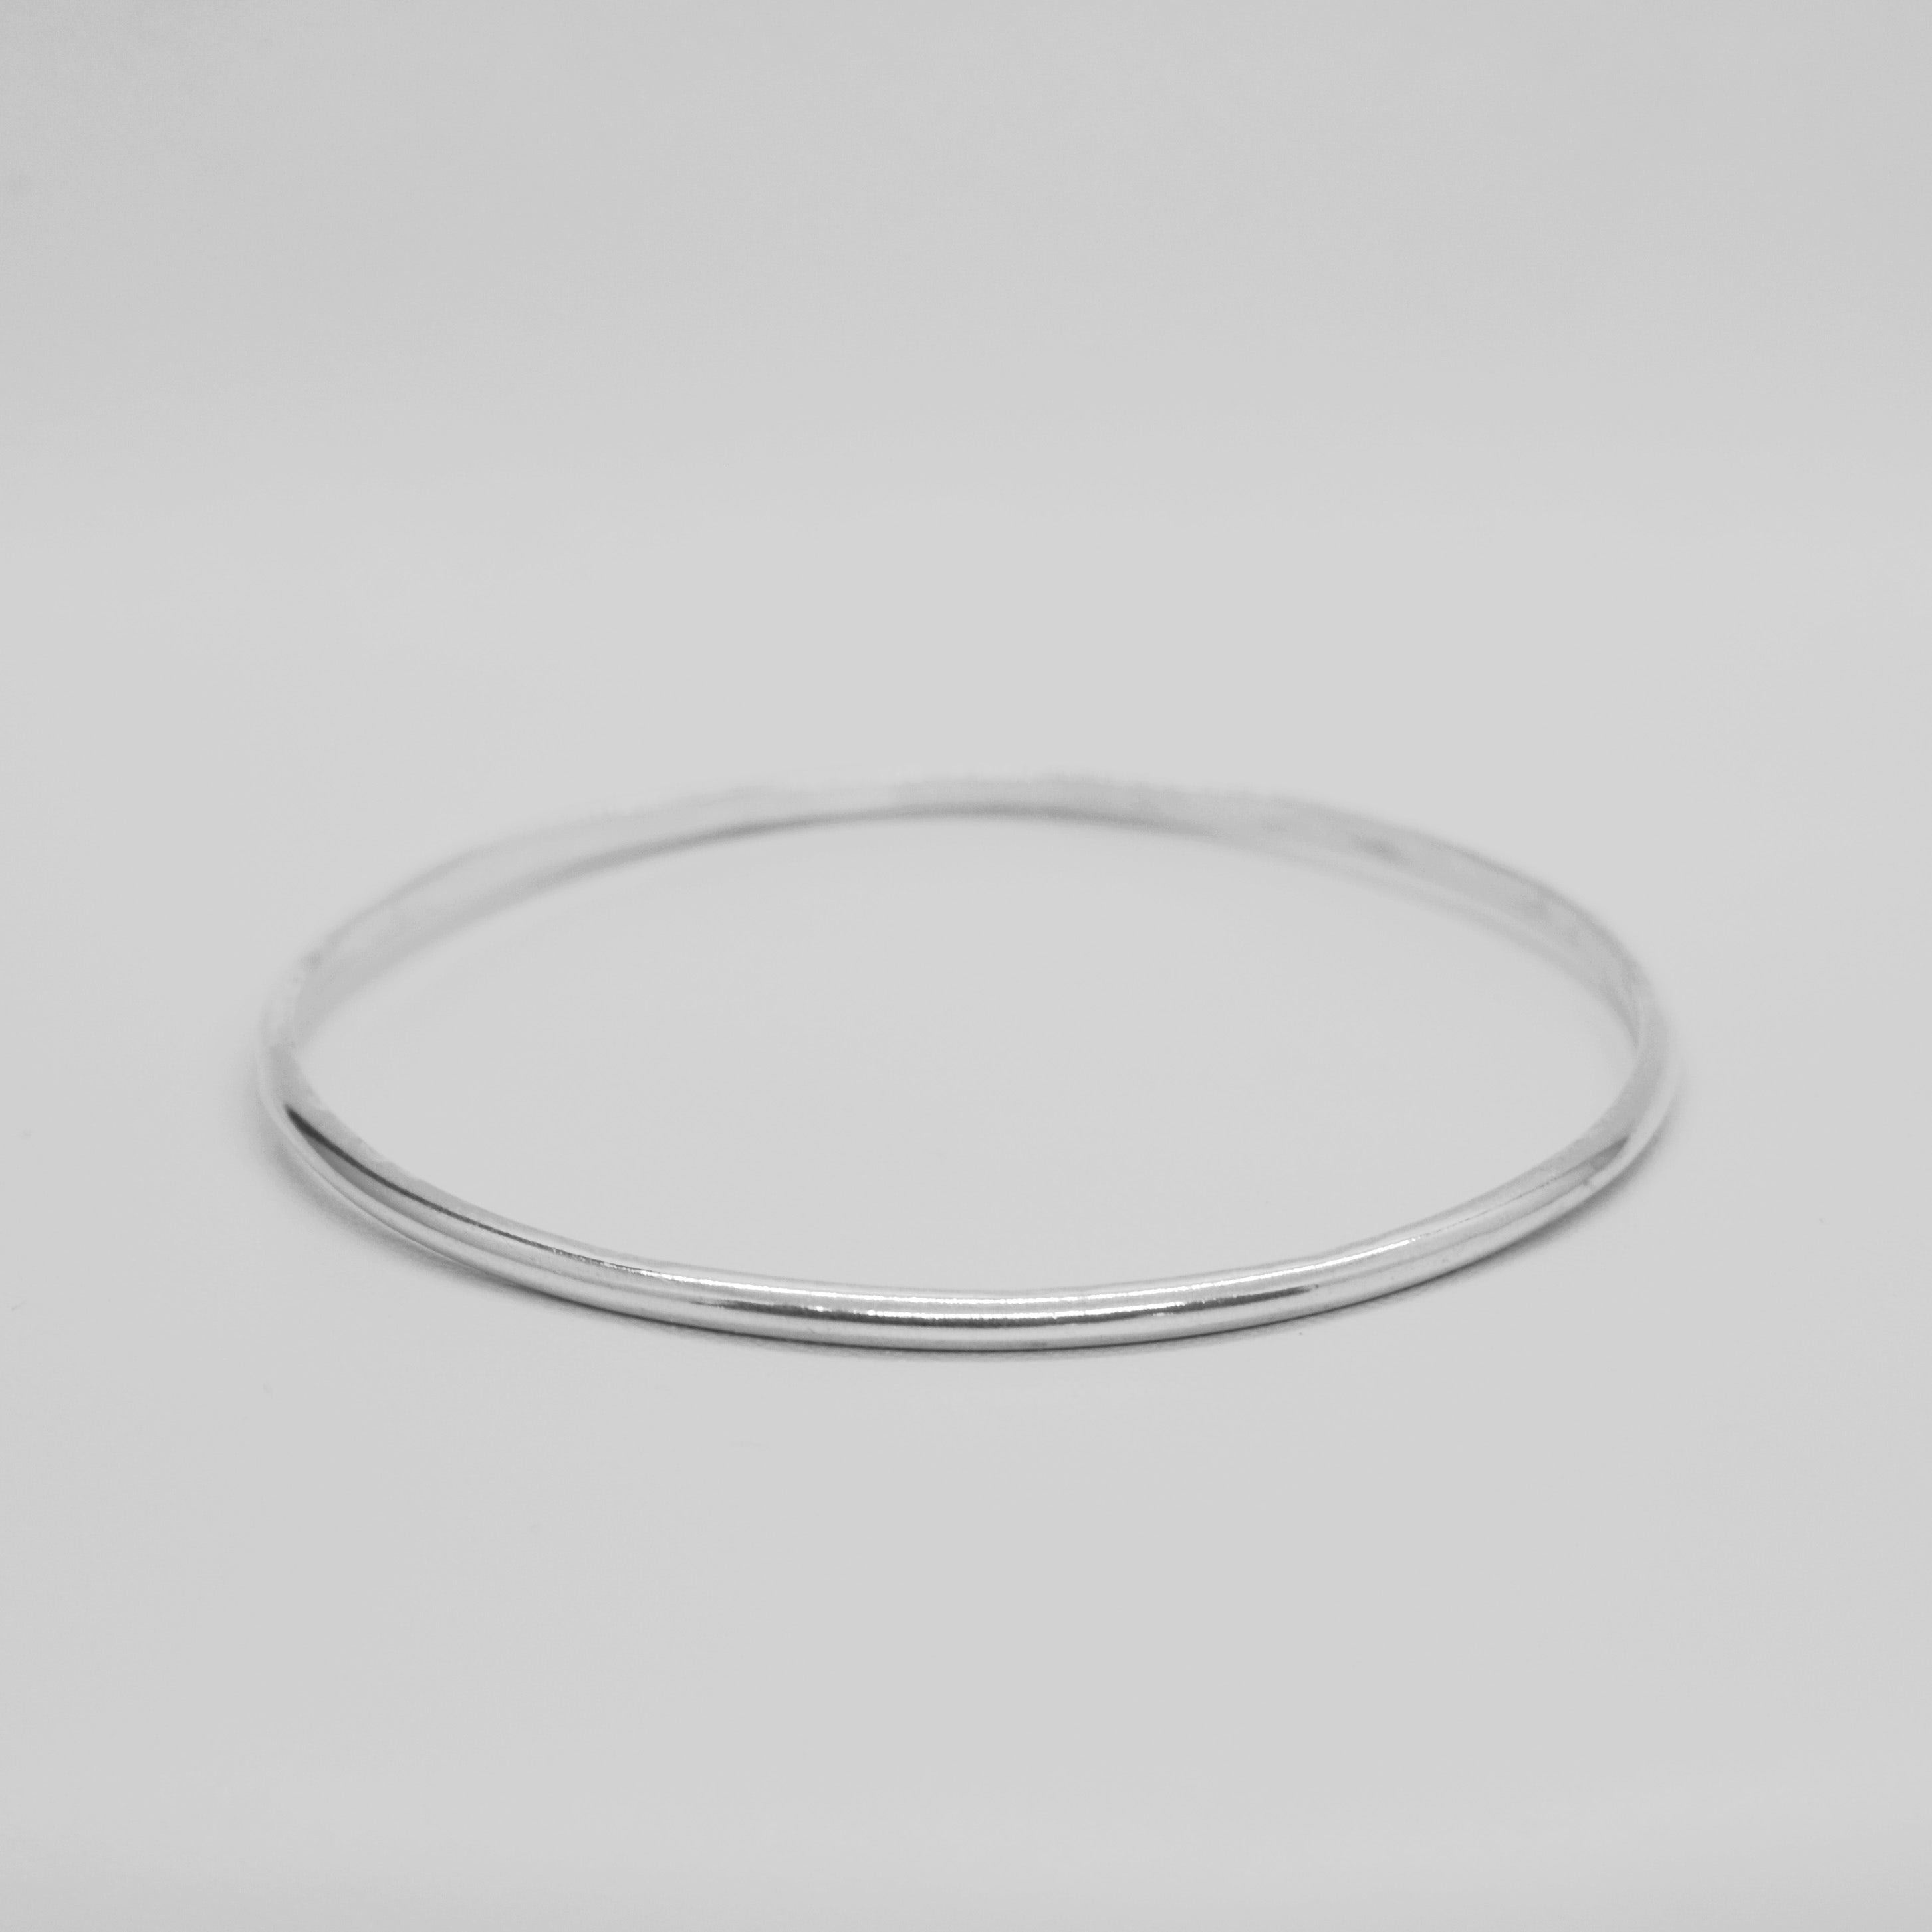 1/2 Round Sterling Silver Bangle